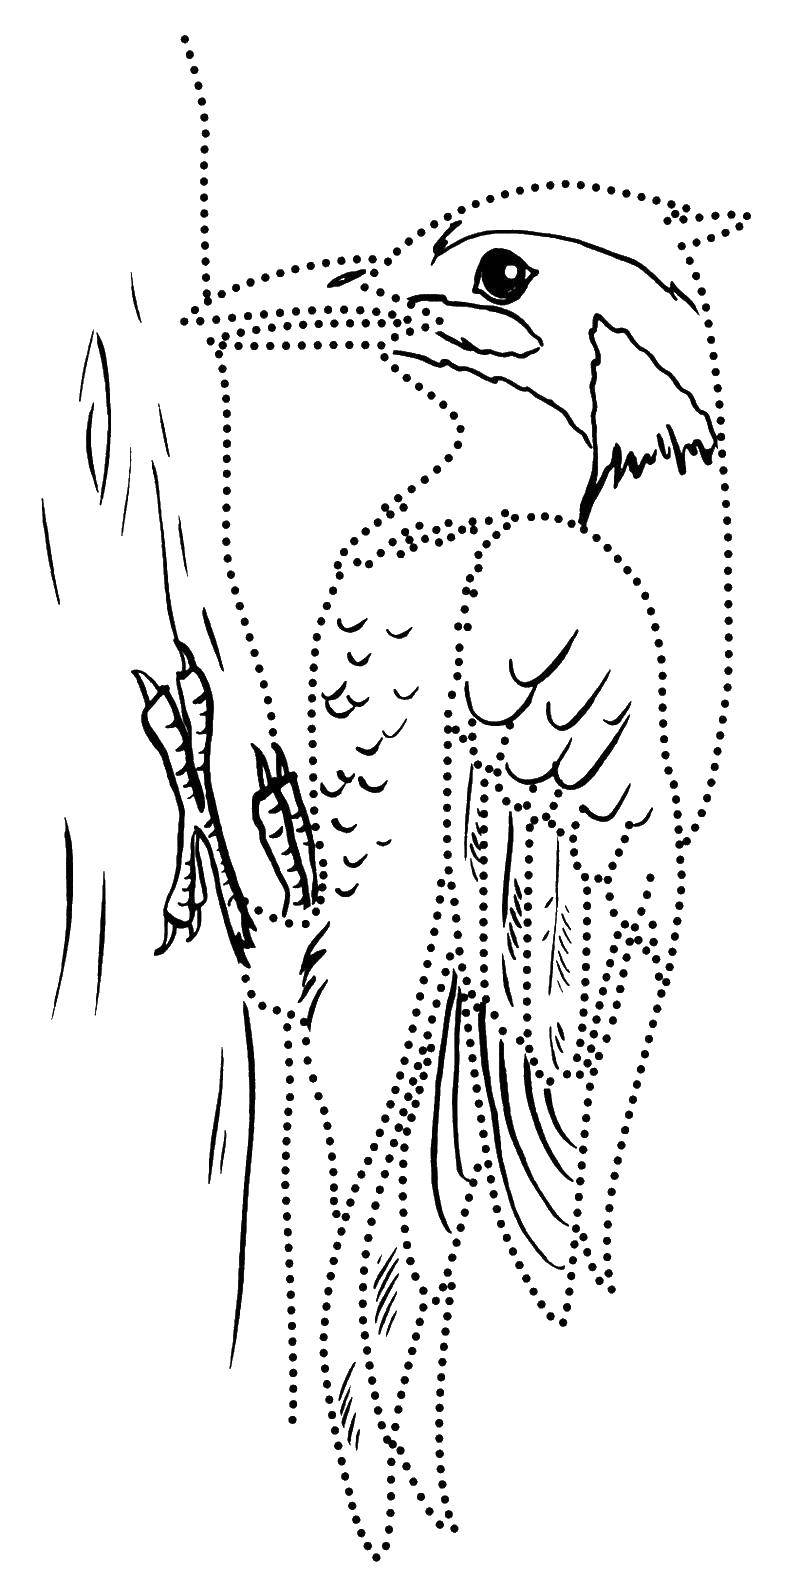 Coloring The outline of the woodpecker. Category Woodpecker . Tags:  birds, woodpecker, contour.